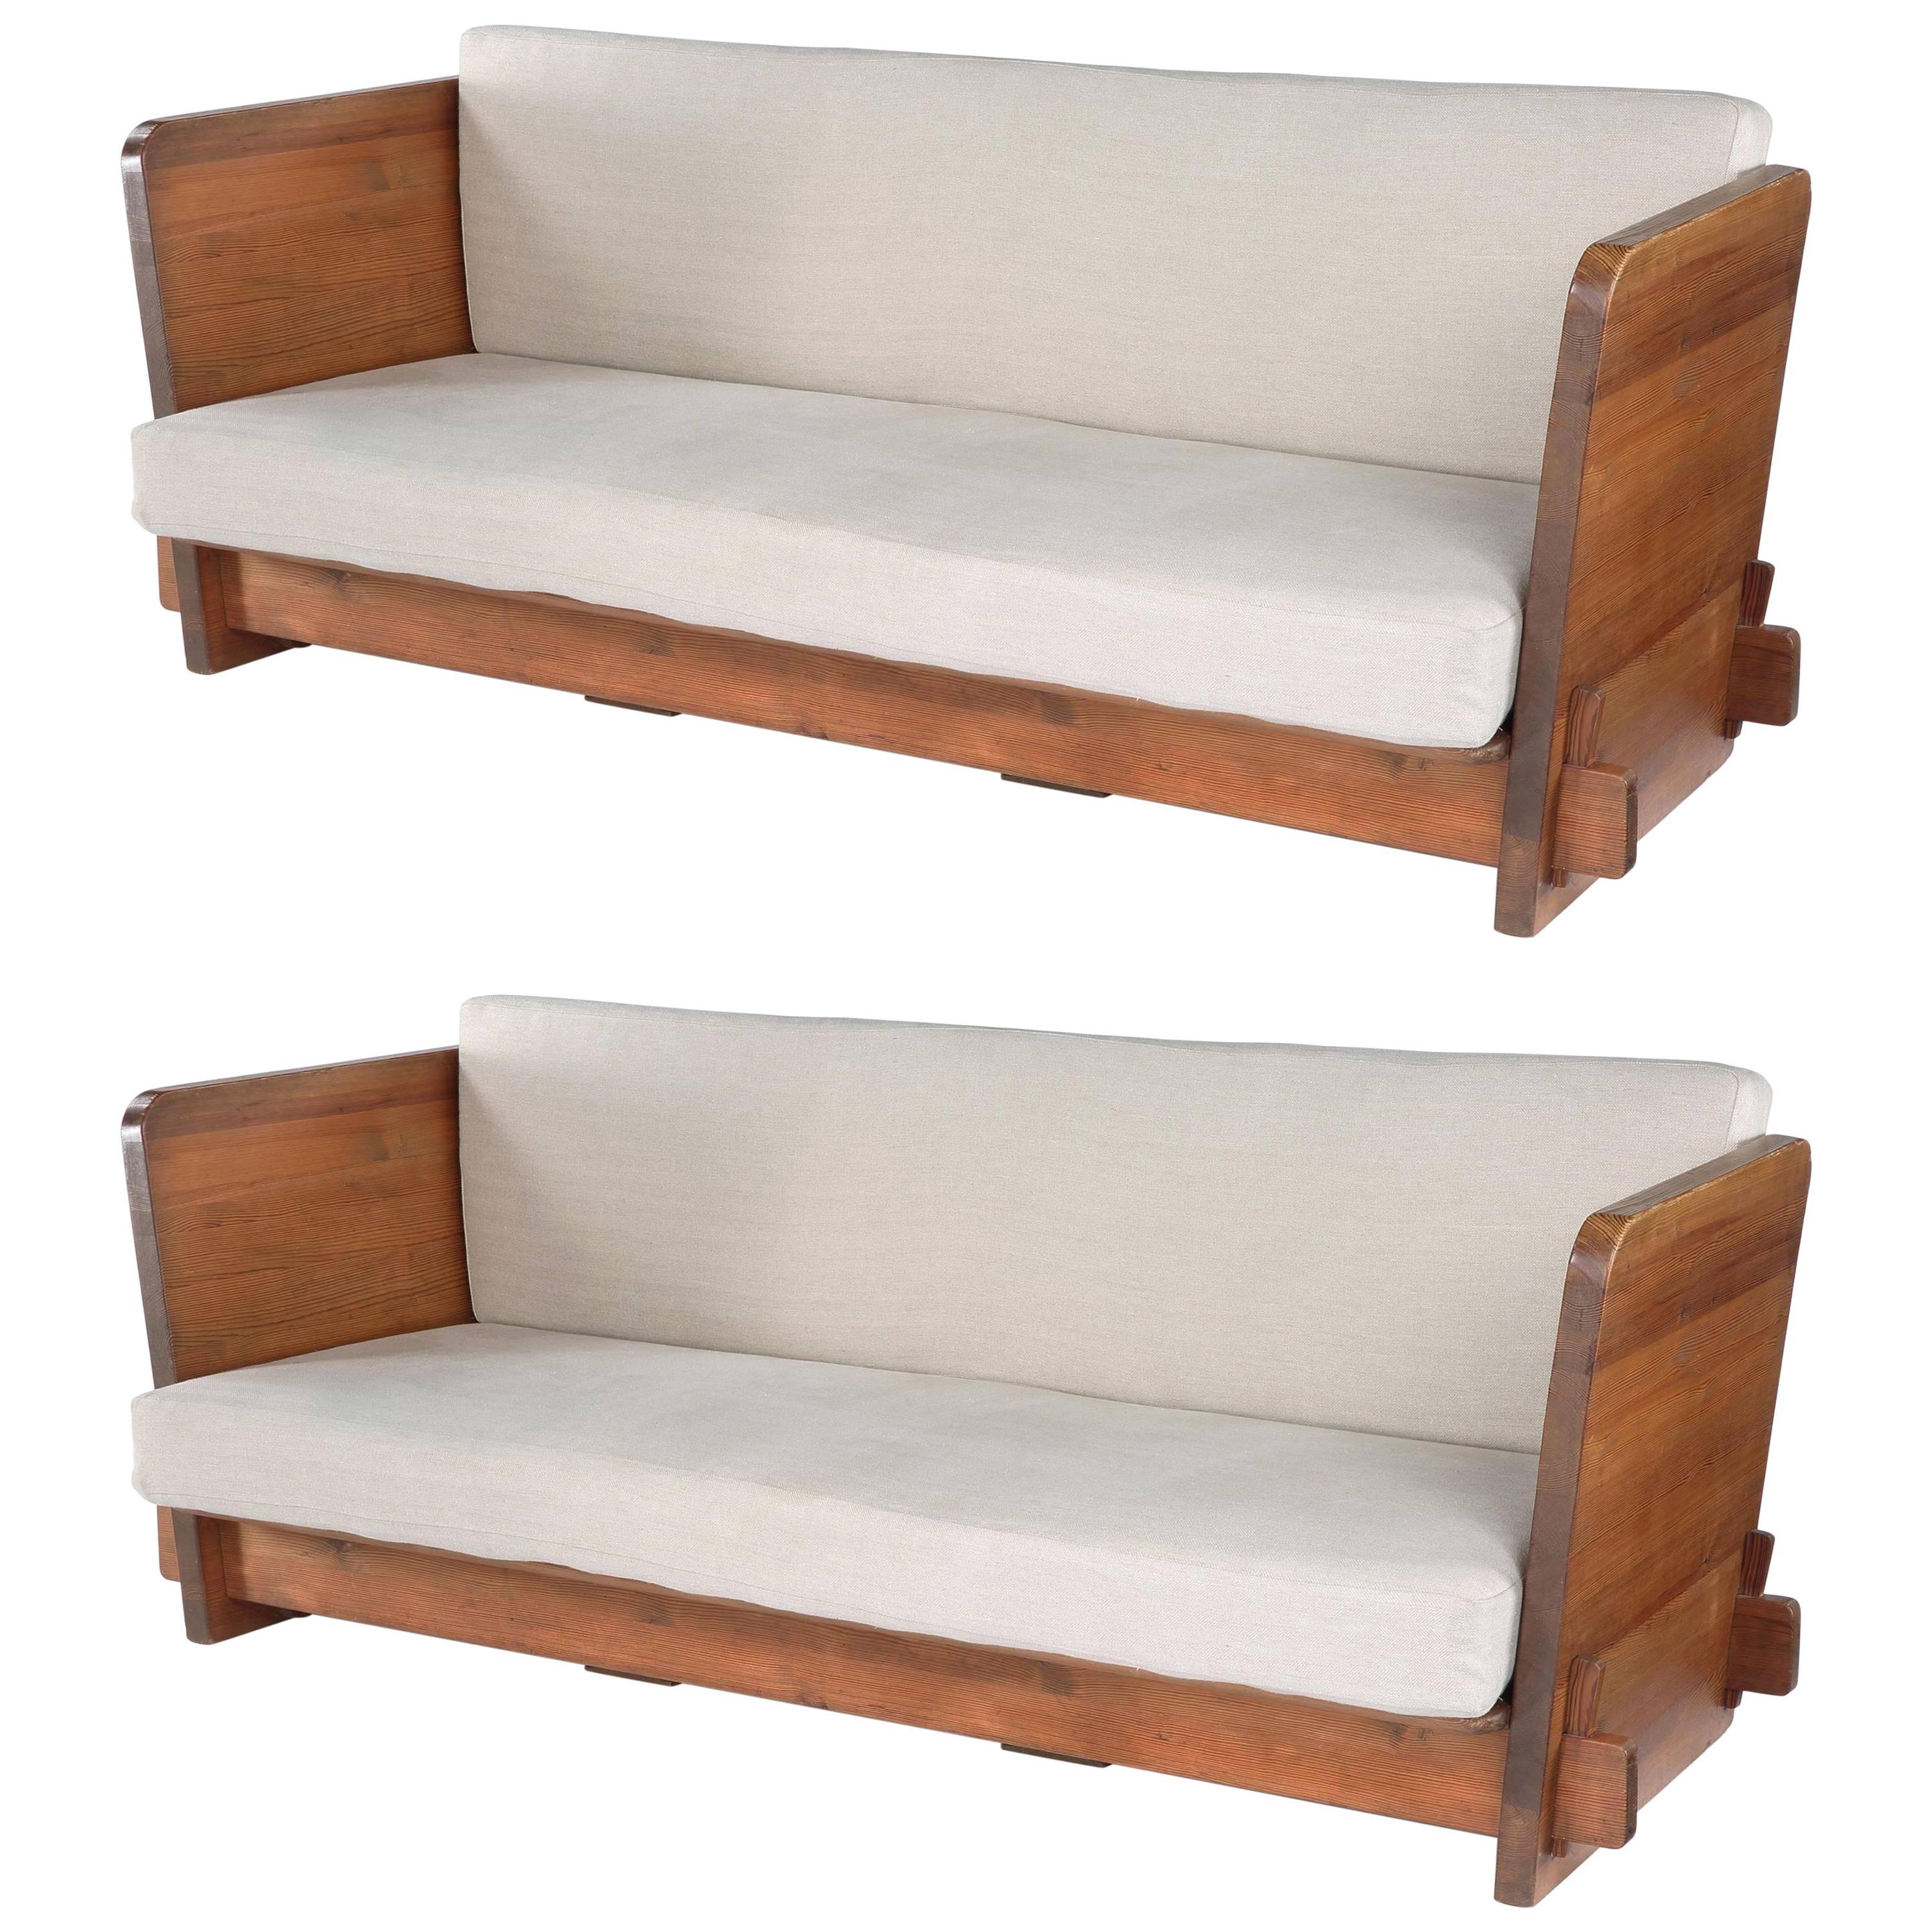 Pair of 1930s Pine 'Lovö' Sofas by Axel Einar Hjorth For Sale